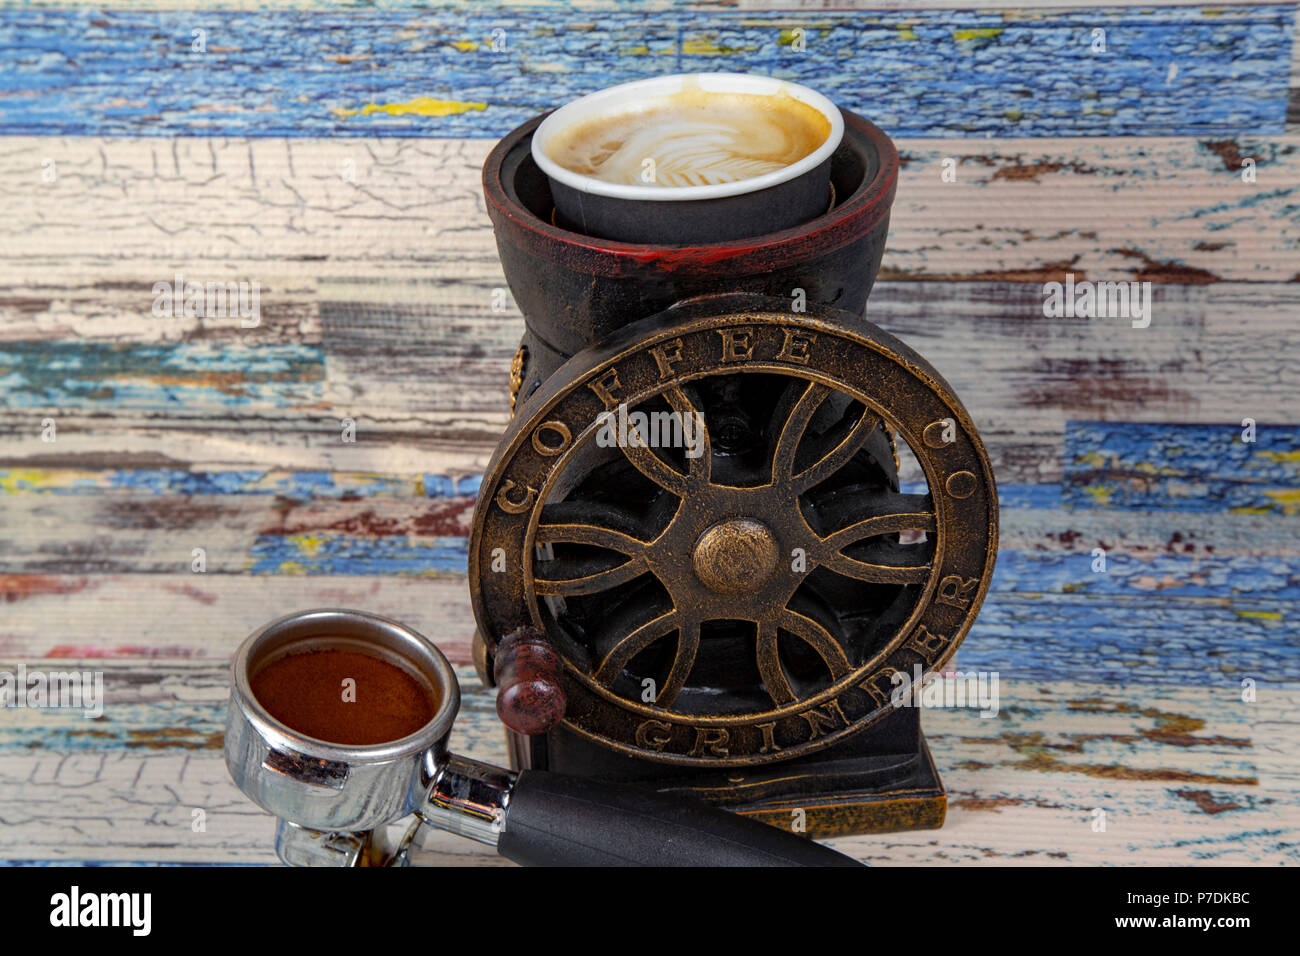 https://c8.alamy.com/comp/P7DKBC/coffee-machine-preparing-fresh-coffee-closeup-of-filter-holder-with-ground-powder-on-bar-coffee-maker-and-pouring-into-white-cup-at-P7DKBC.jpg